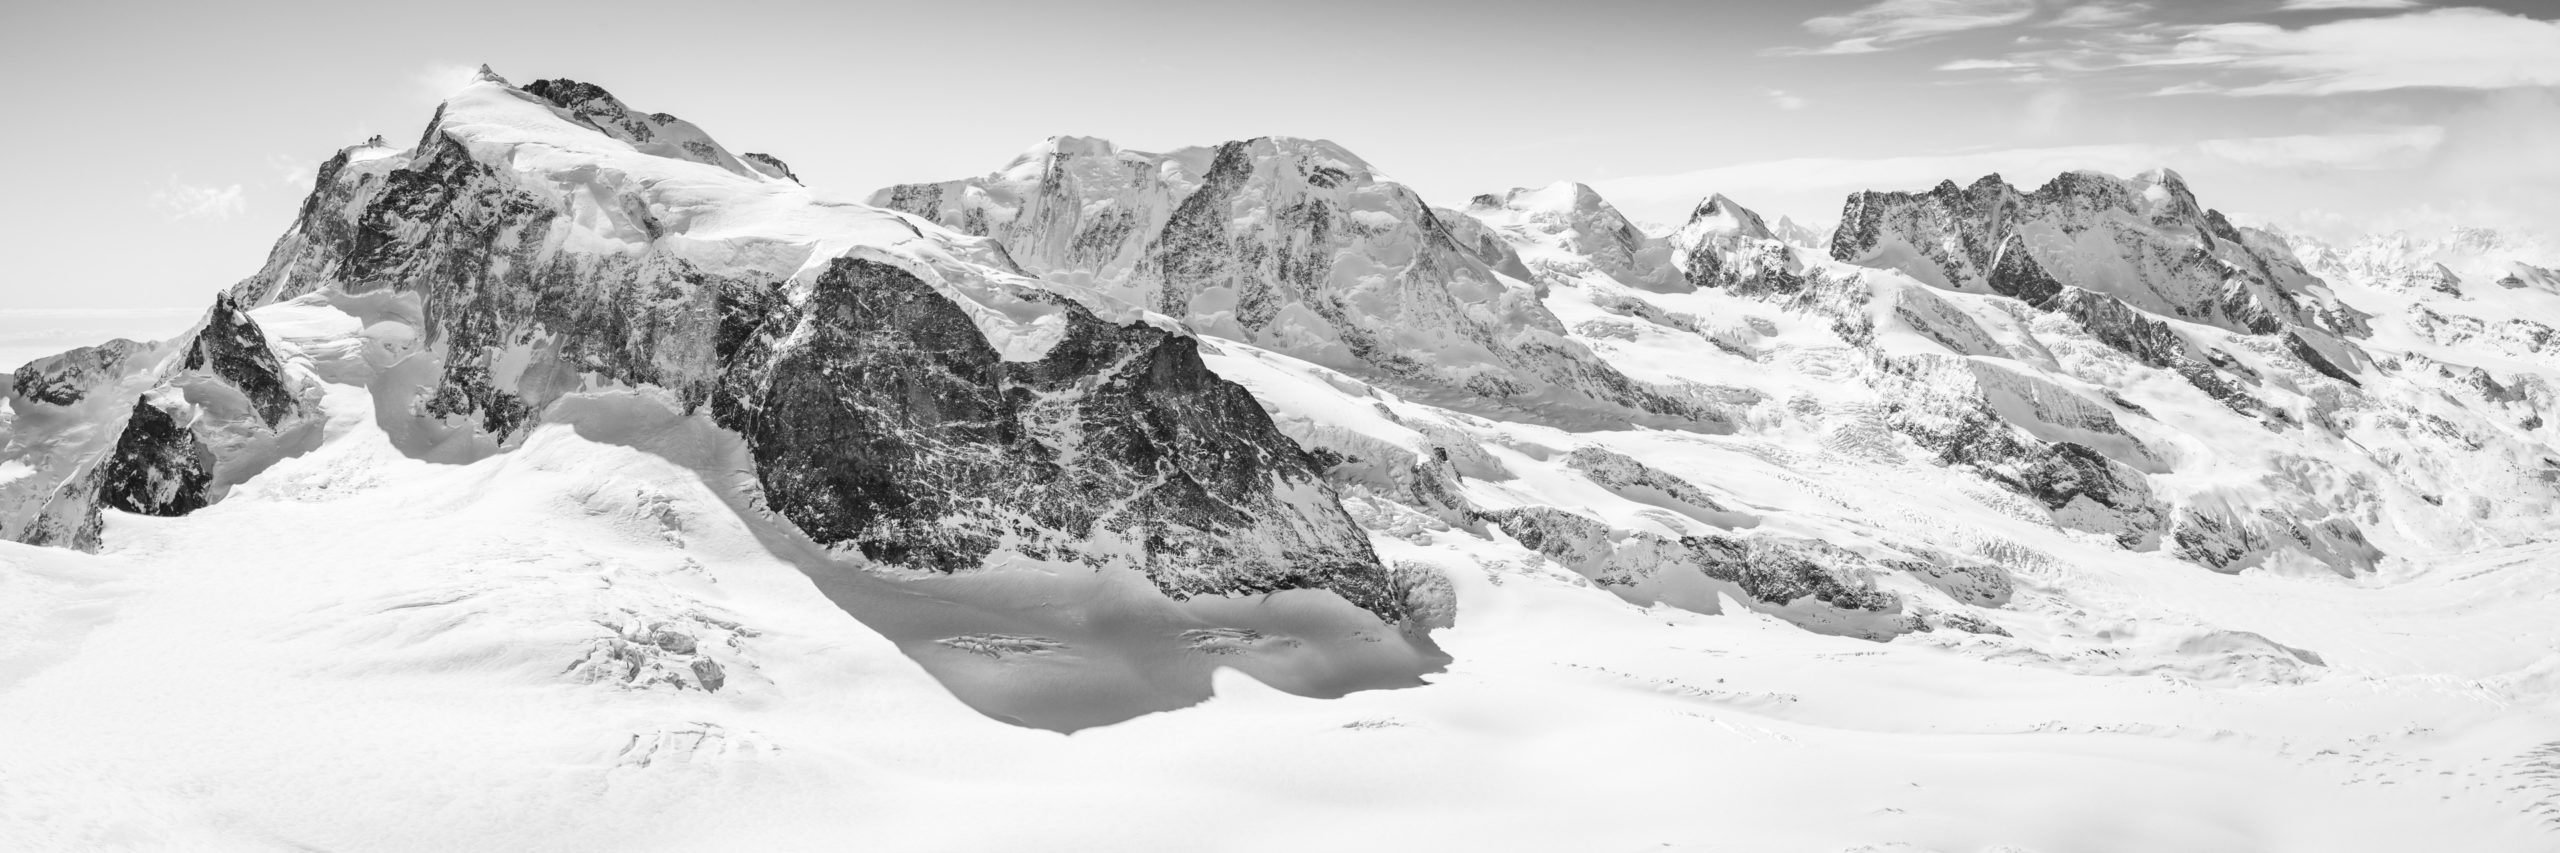 Zermatt Monte rosa panorama - photo  print and framing of summits of the Swiss Alps - Breithorn - Lyskamm, Castor and Pollux